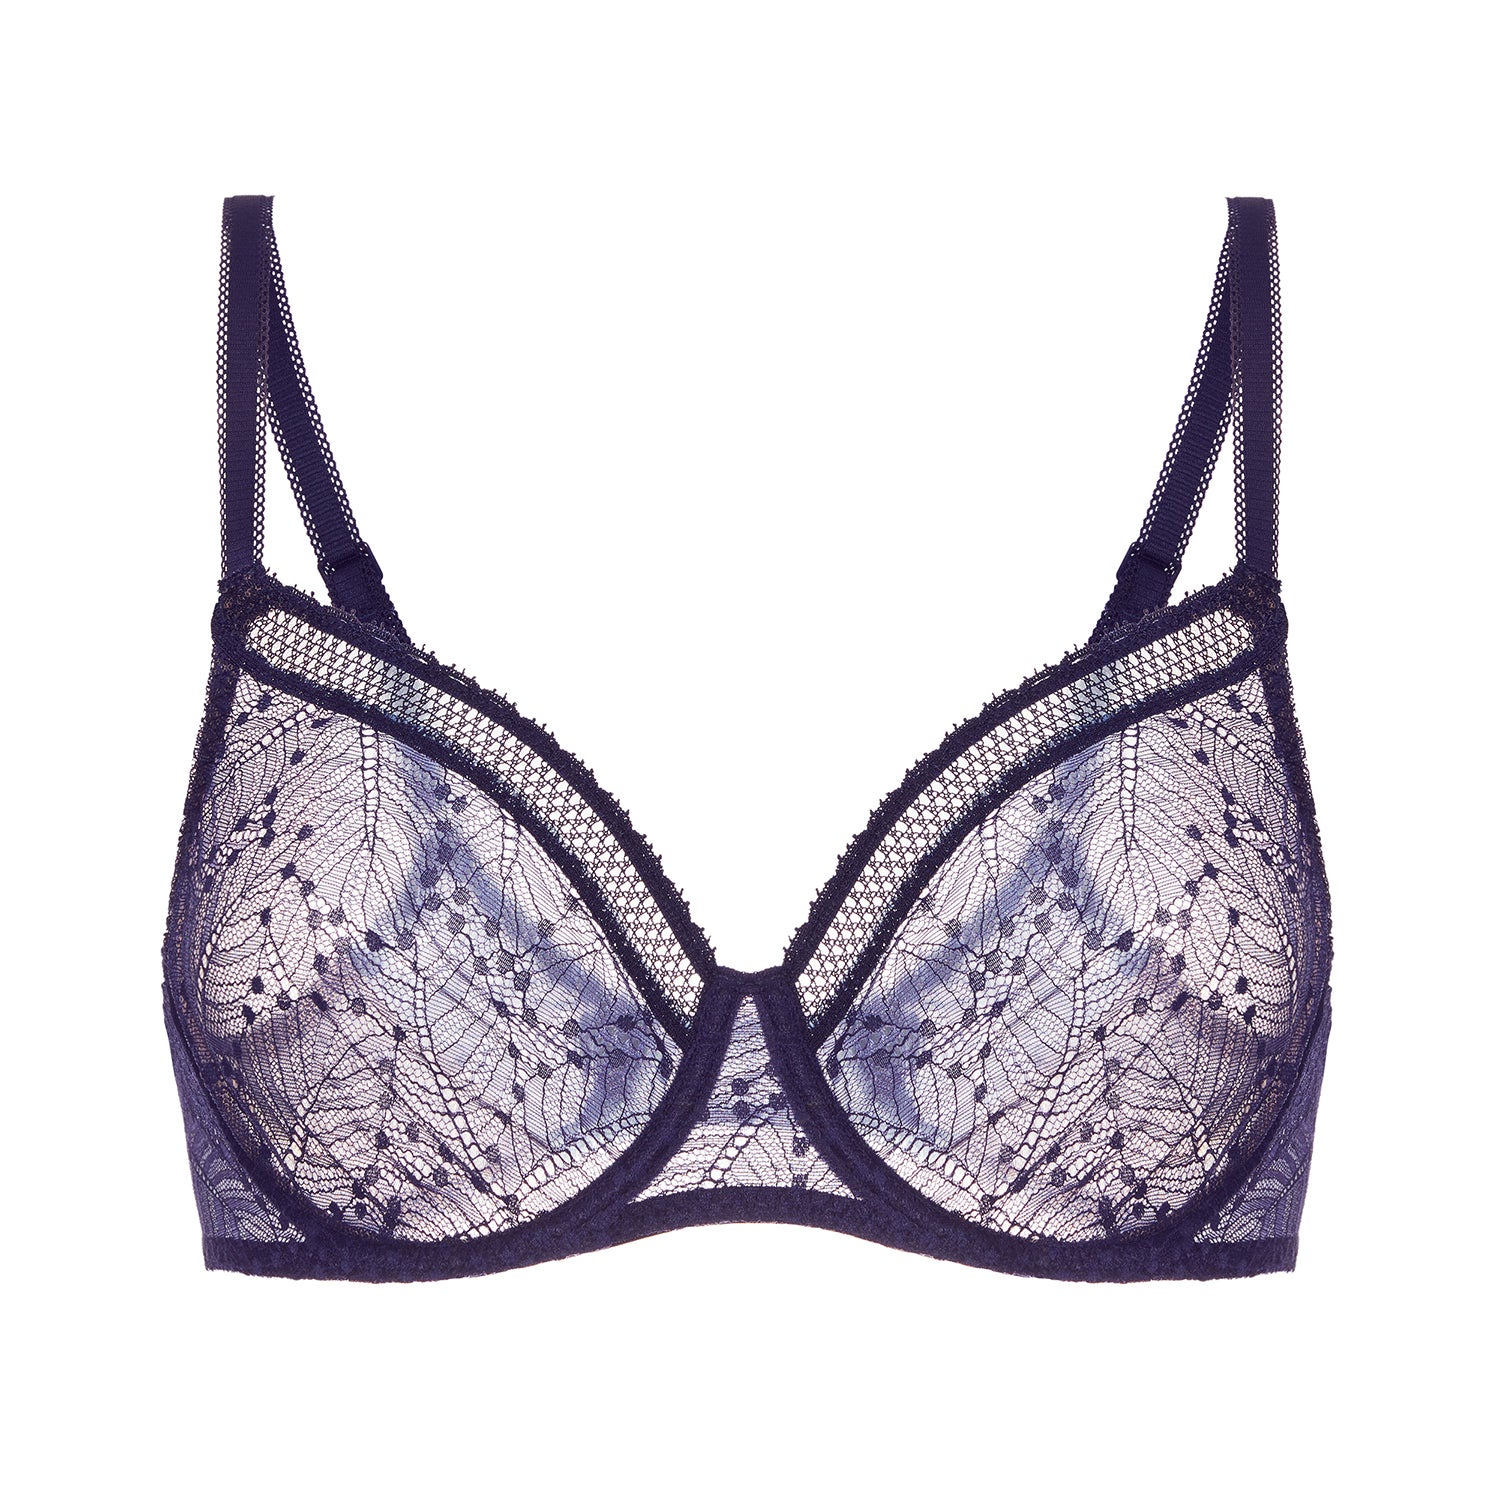 Bras  Price: $130.00 - $139.99; Collection: GRAPHIC SUPPORT